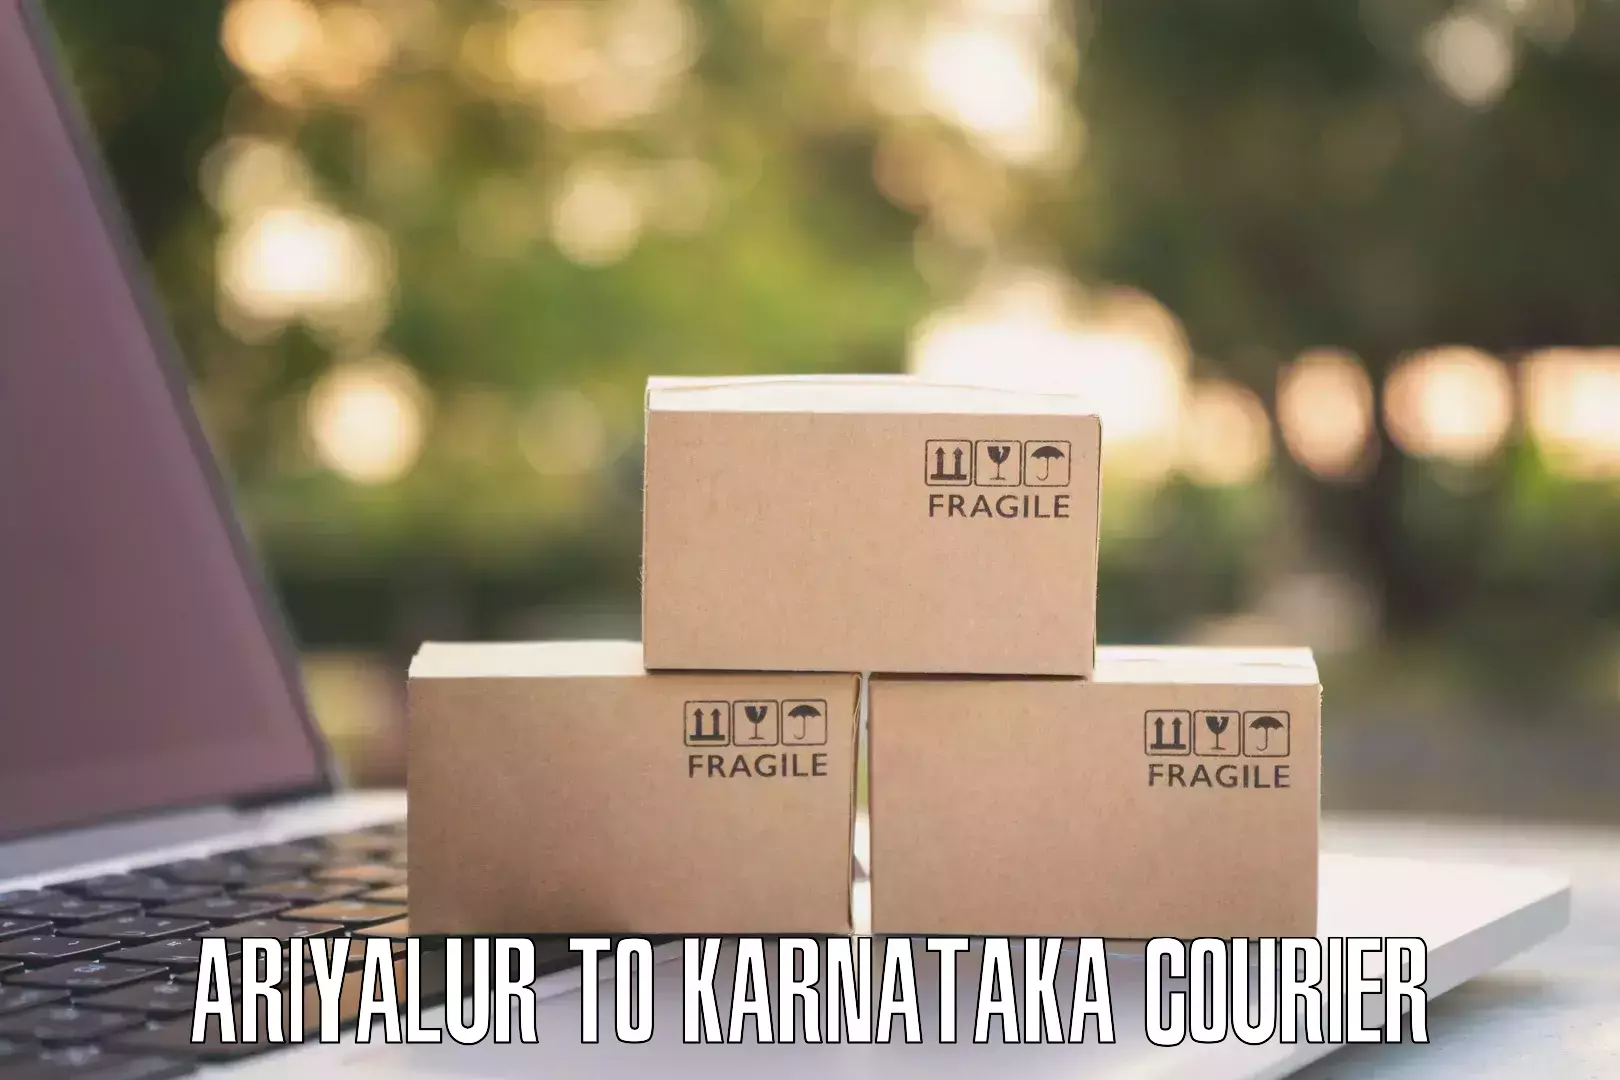 Delivery service partnership in Ariyalur to Manipal